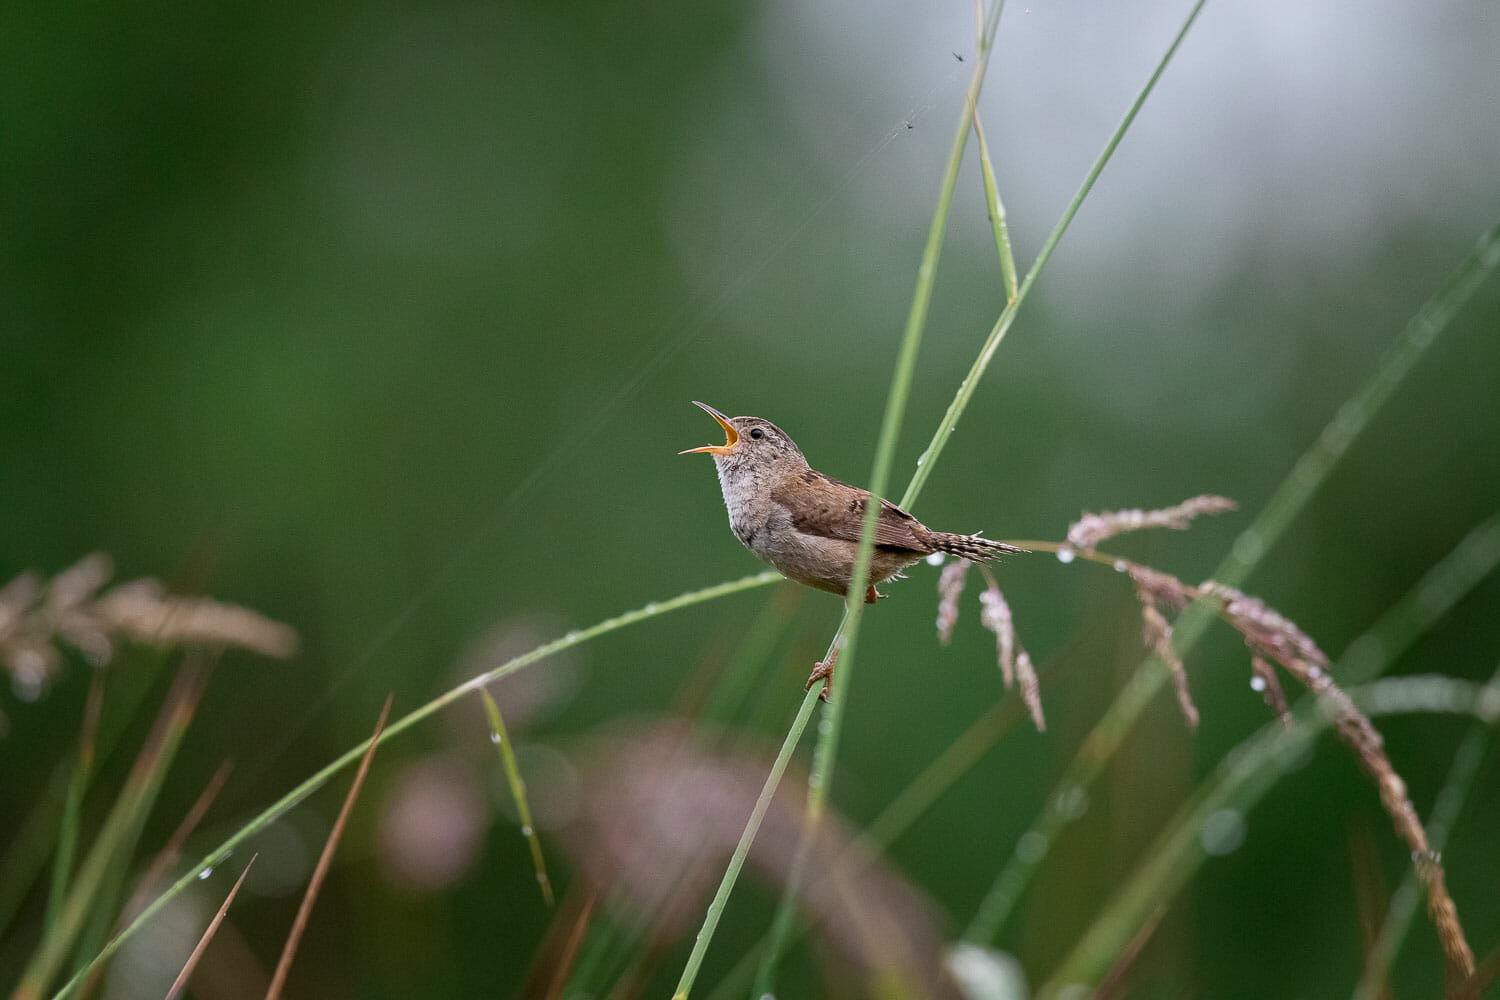 A small bird perched on a grass stalk, singing.